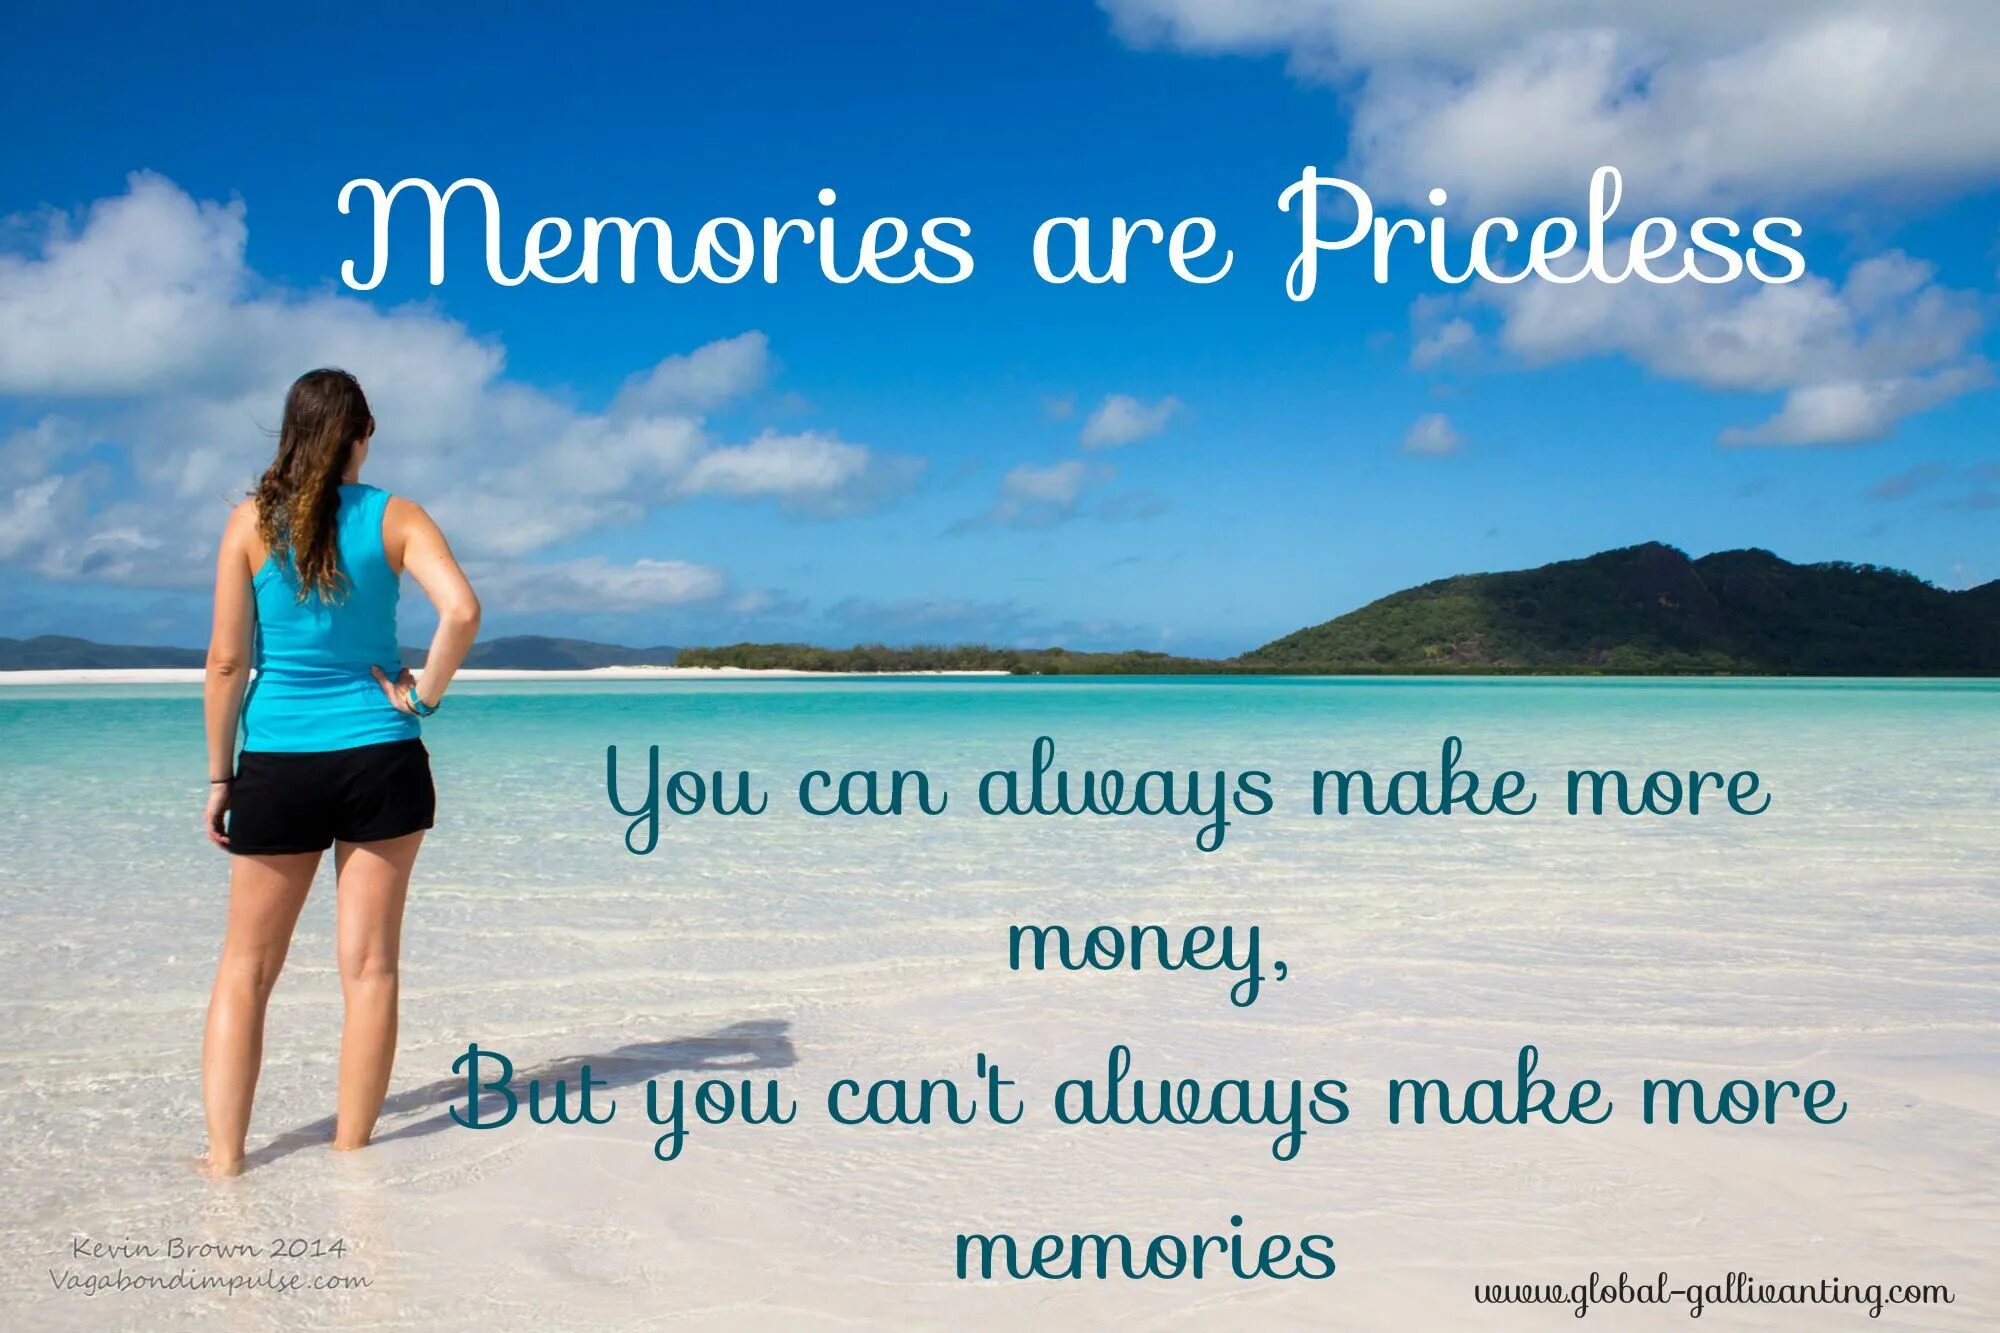 You want more перевод. Priceless. Making Memories. Quotes about travelling. Travel quotes.